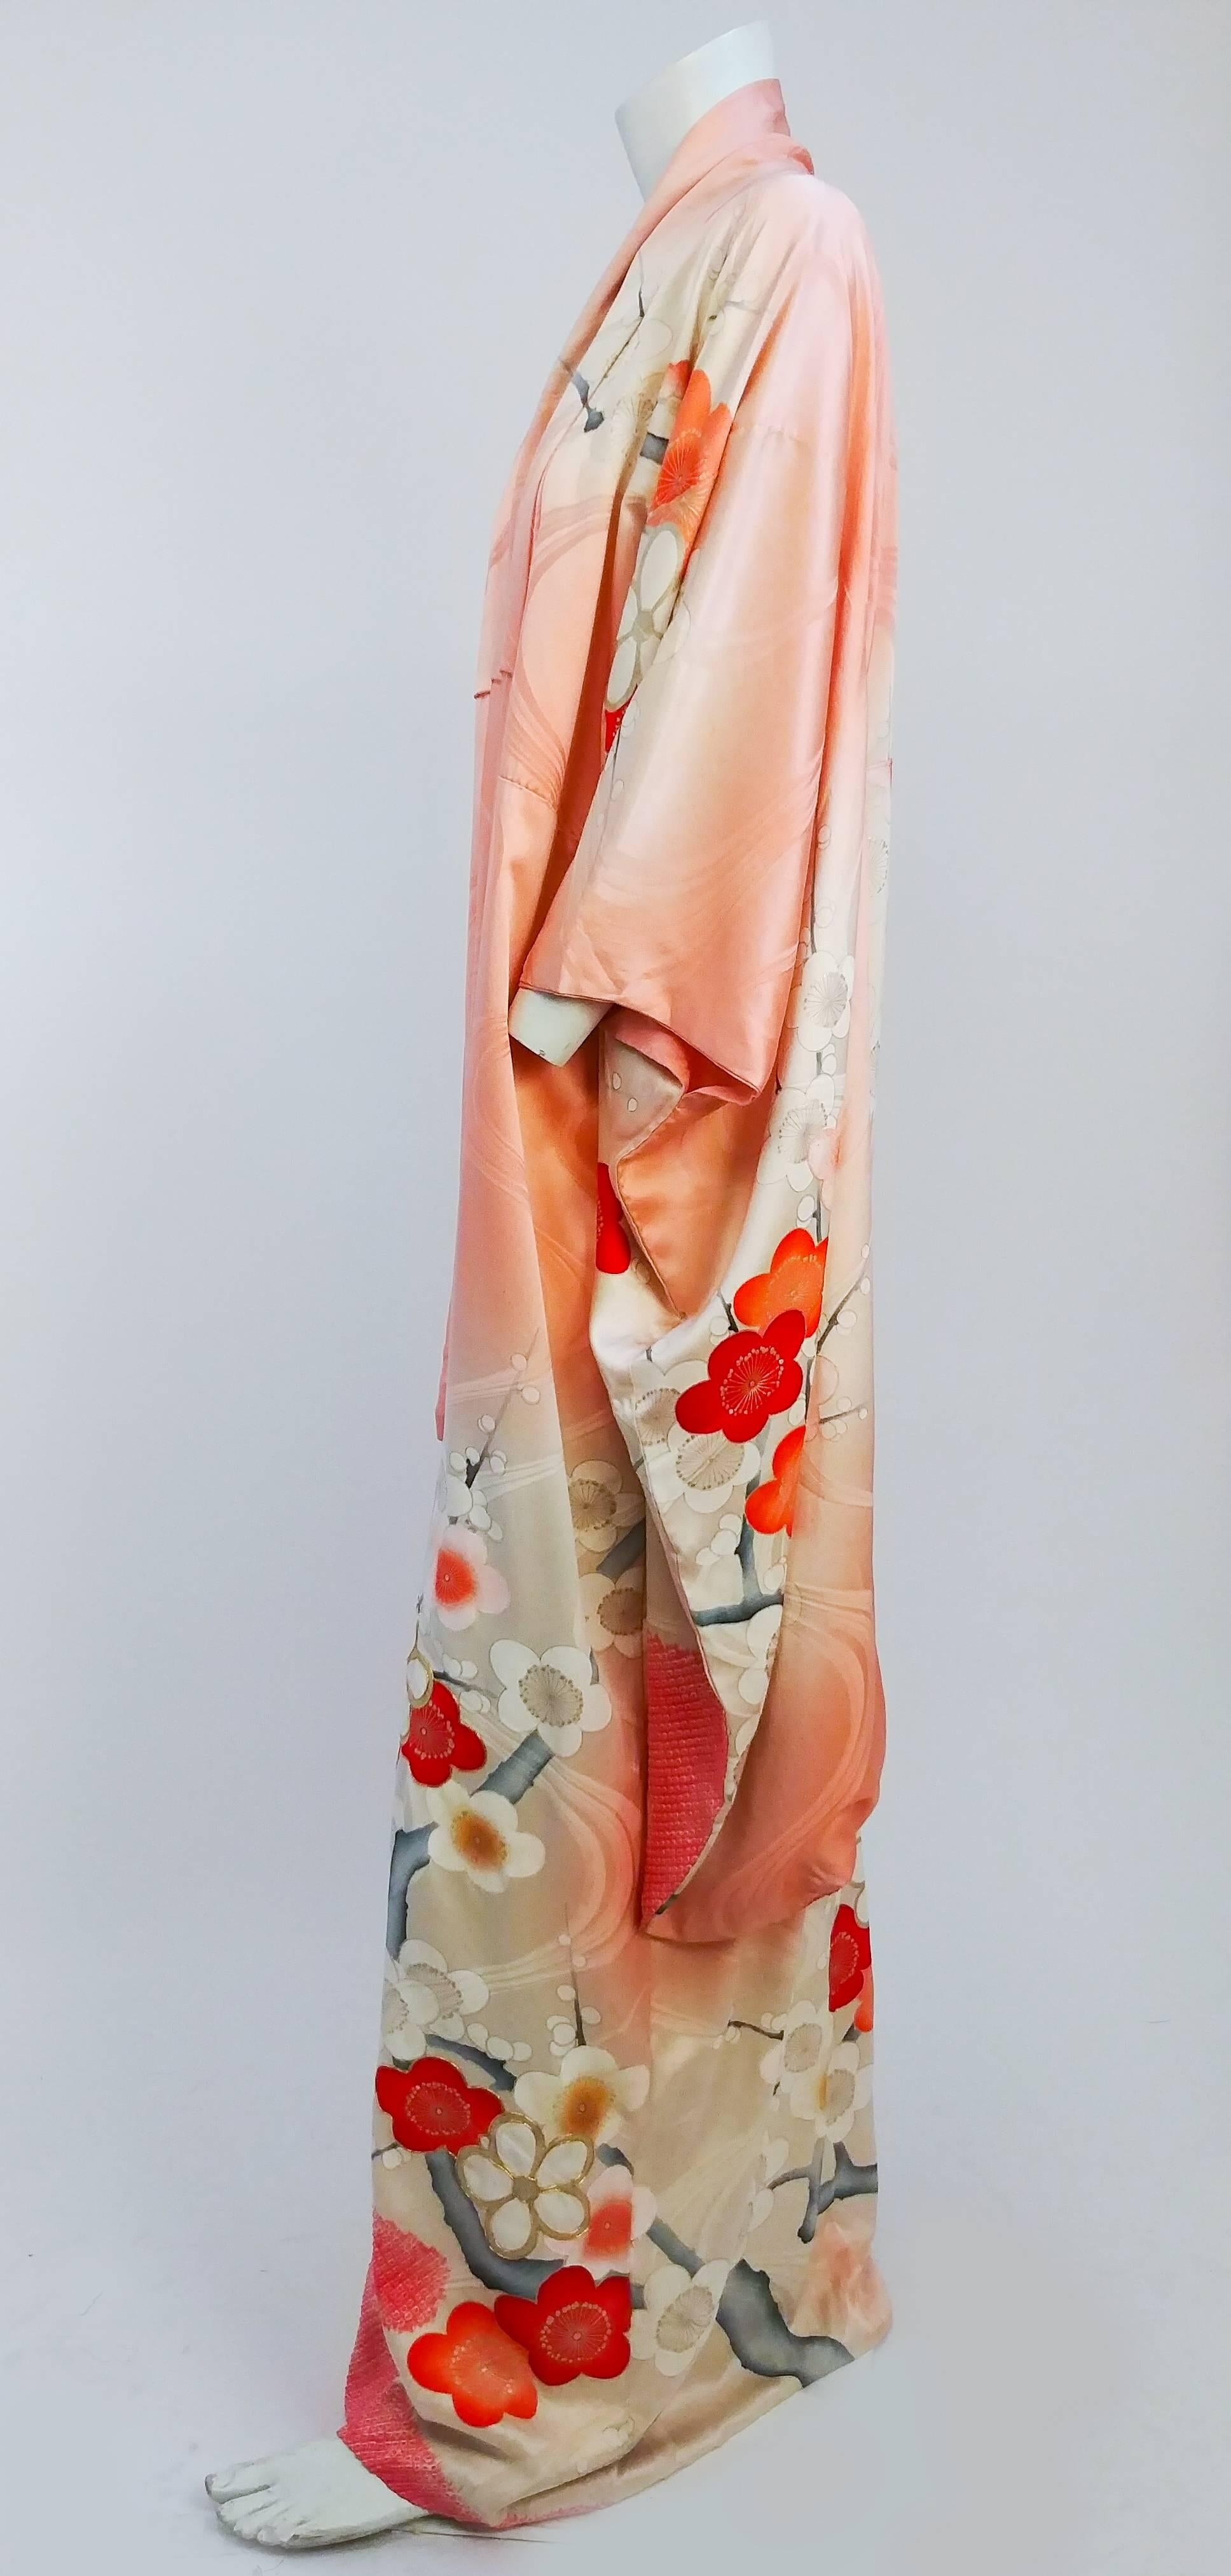 Coral Floral Motif Printed Silk Kimono. Sold originally at Gump's. Flowers are outlined in metallic silver painted on a silk jacquard with a wave motif. 